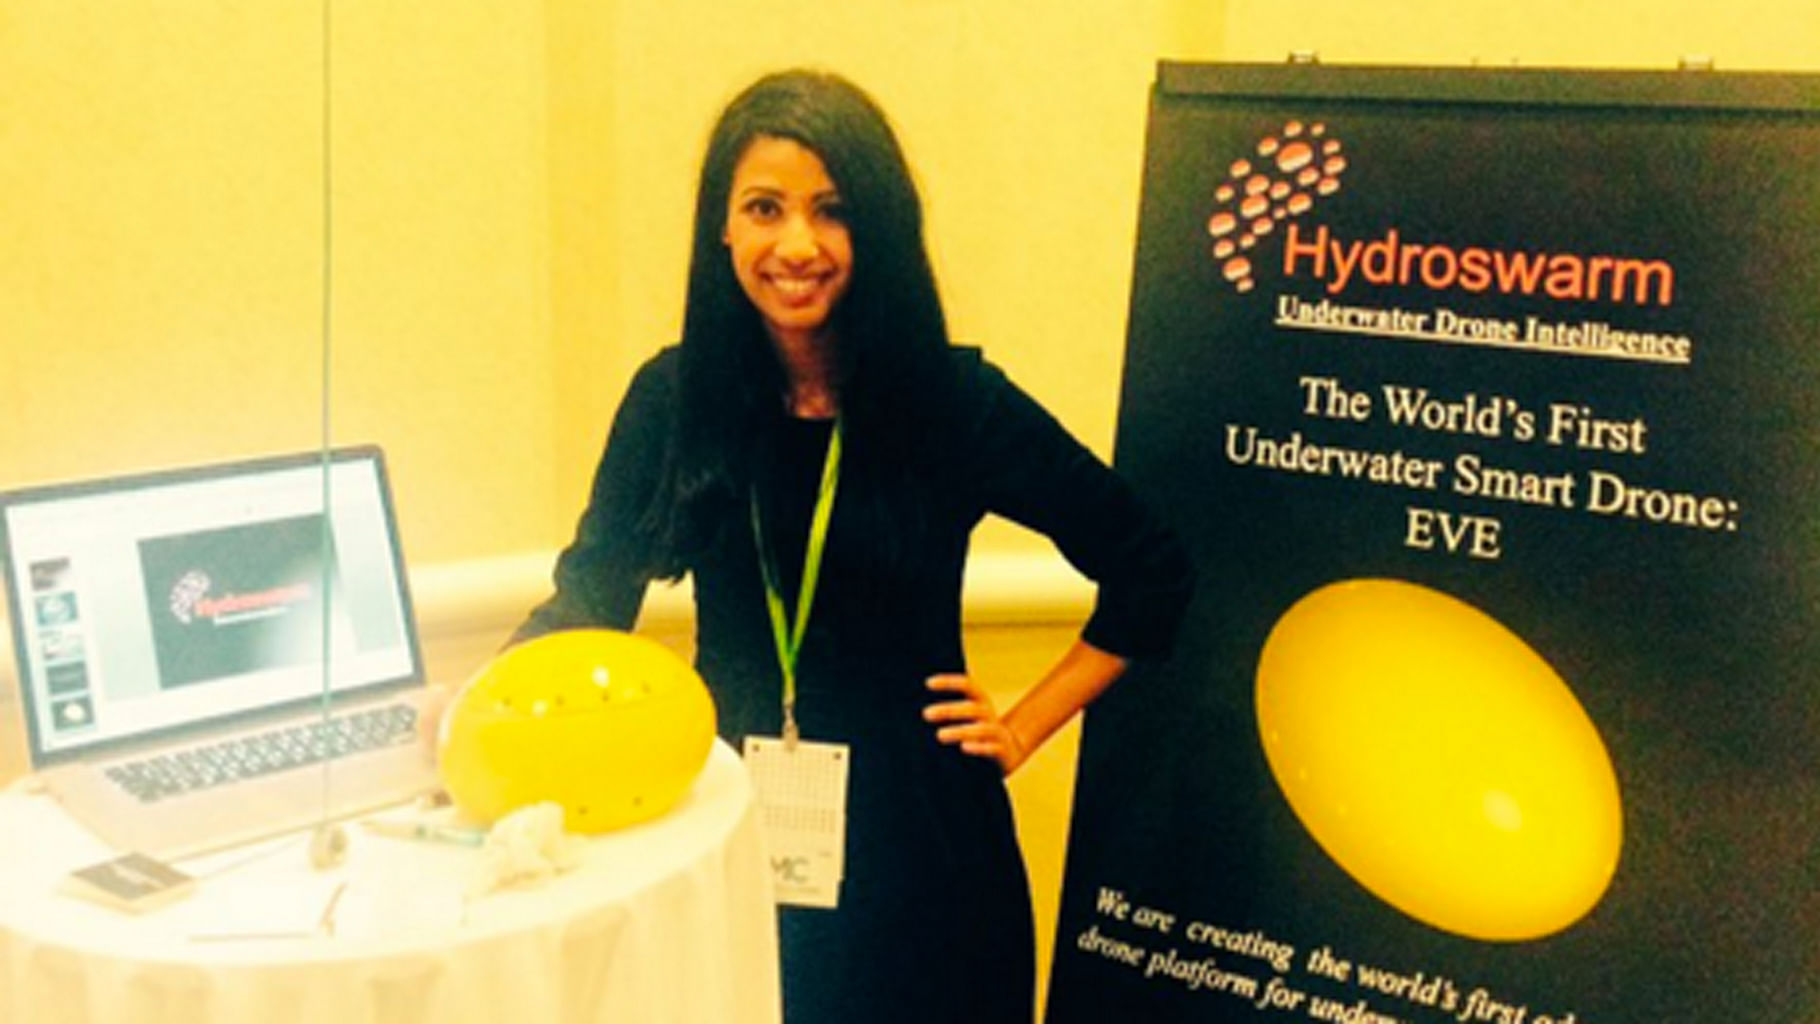  Sampriti Bhattacharyya, a PhD holder from MIT, pitched the idea of an underwater drone, Hydroswarm. (Photo courtesy: <a href="https://twitter.com/hydroswarm">Hydroswarm’s Twitter page</a>)